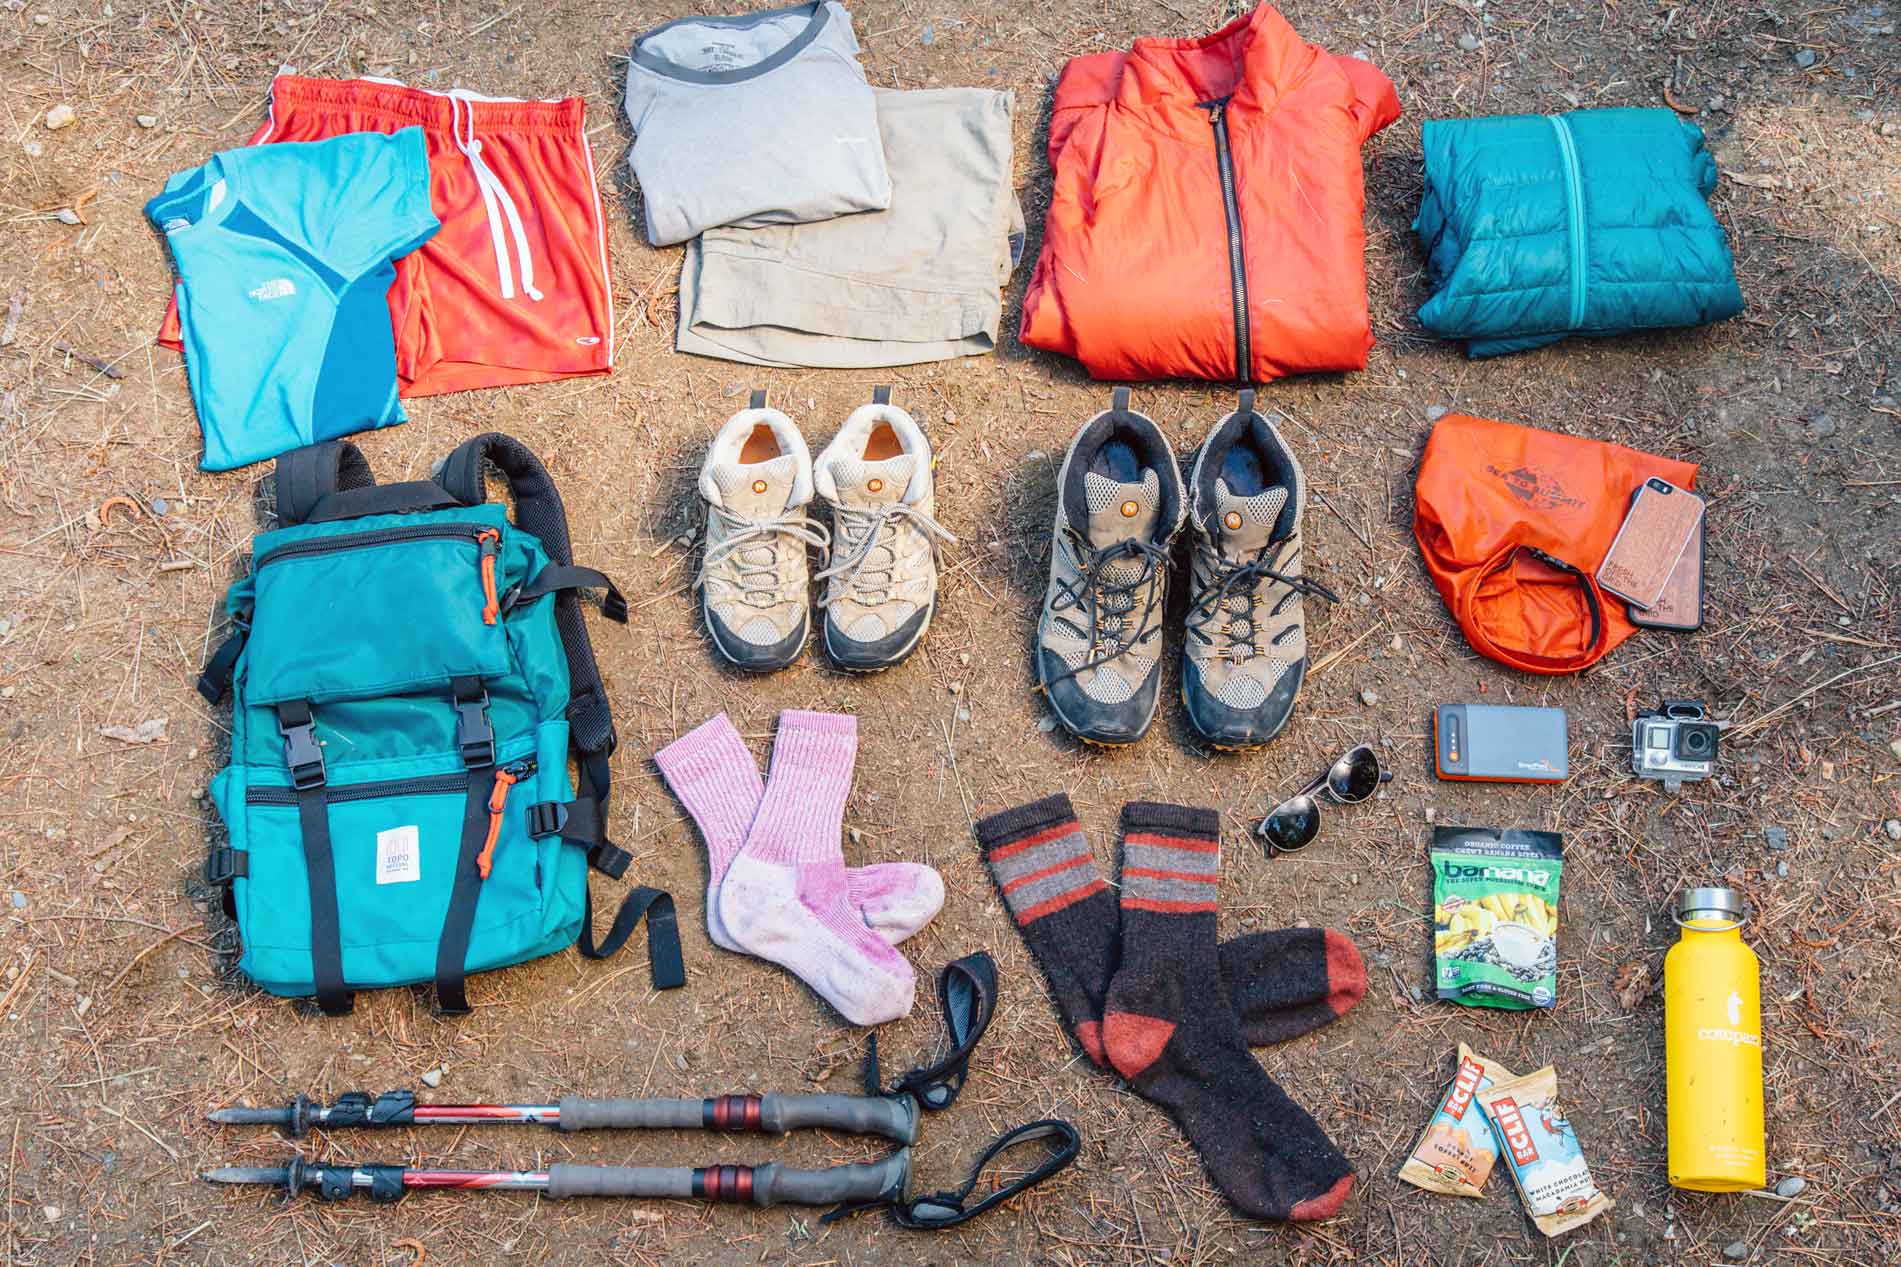 Gear for hiking the Narrows laid out on the ground